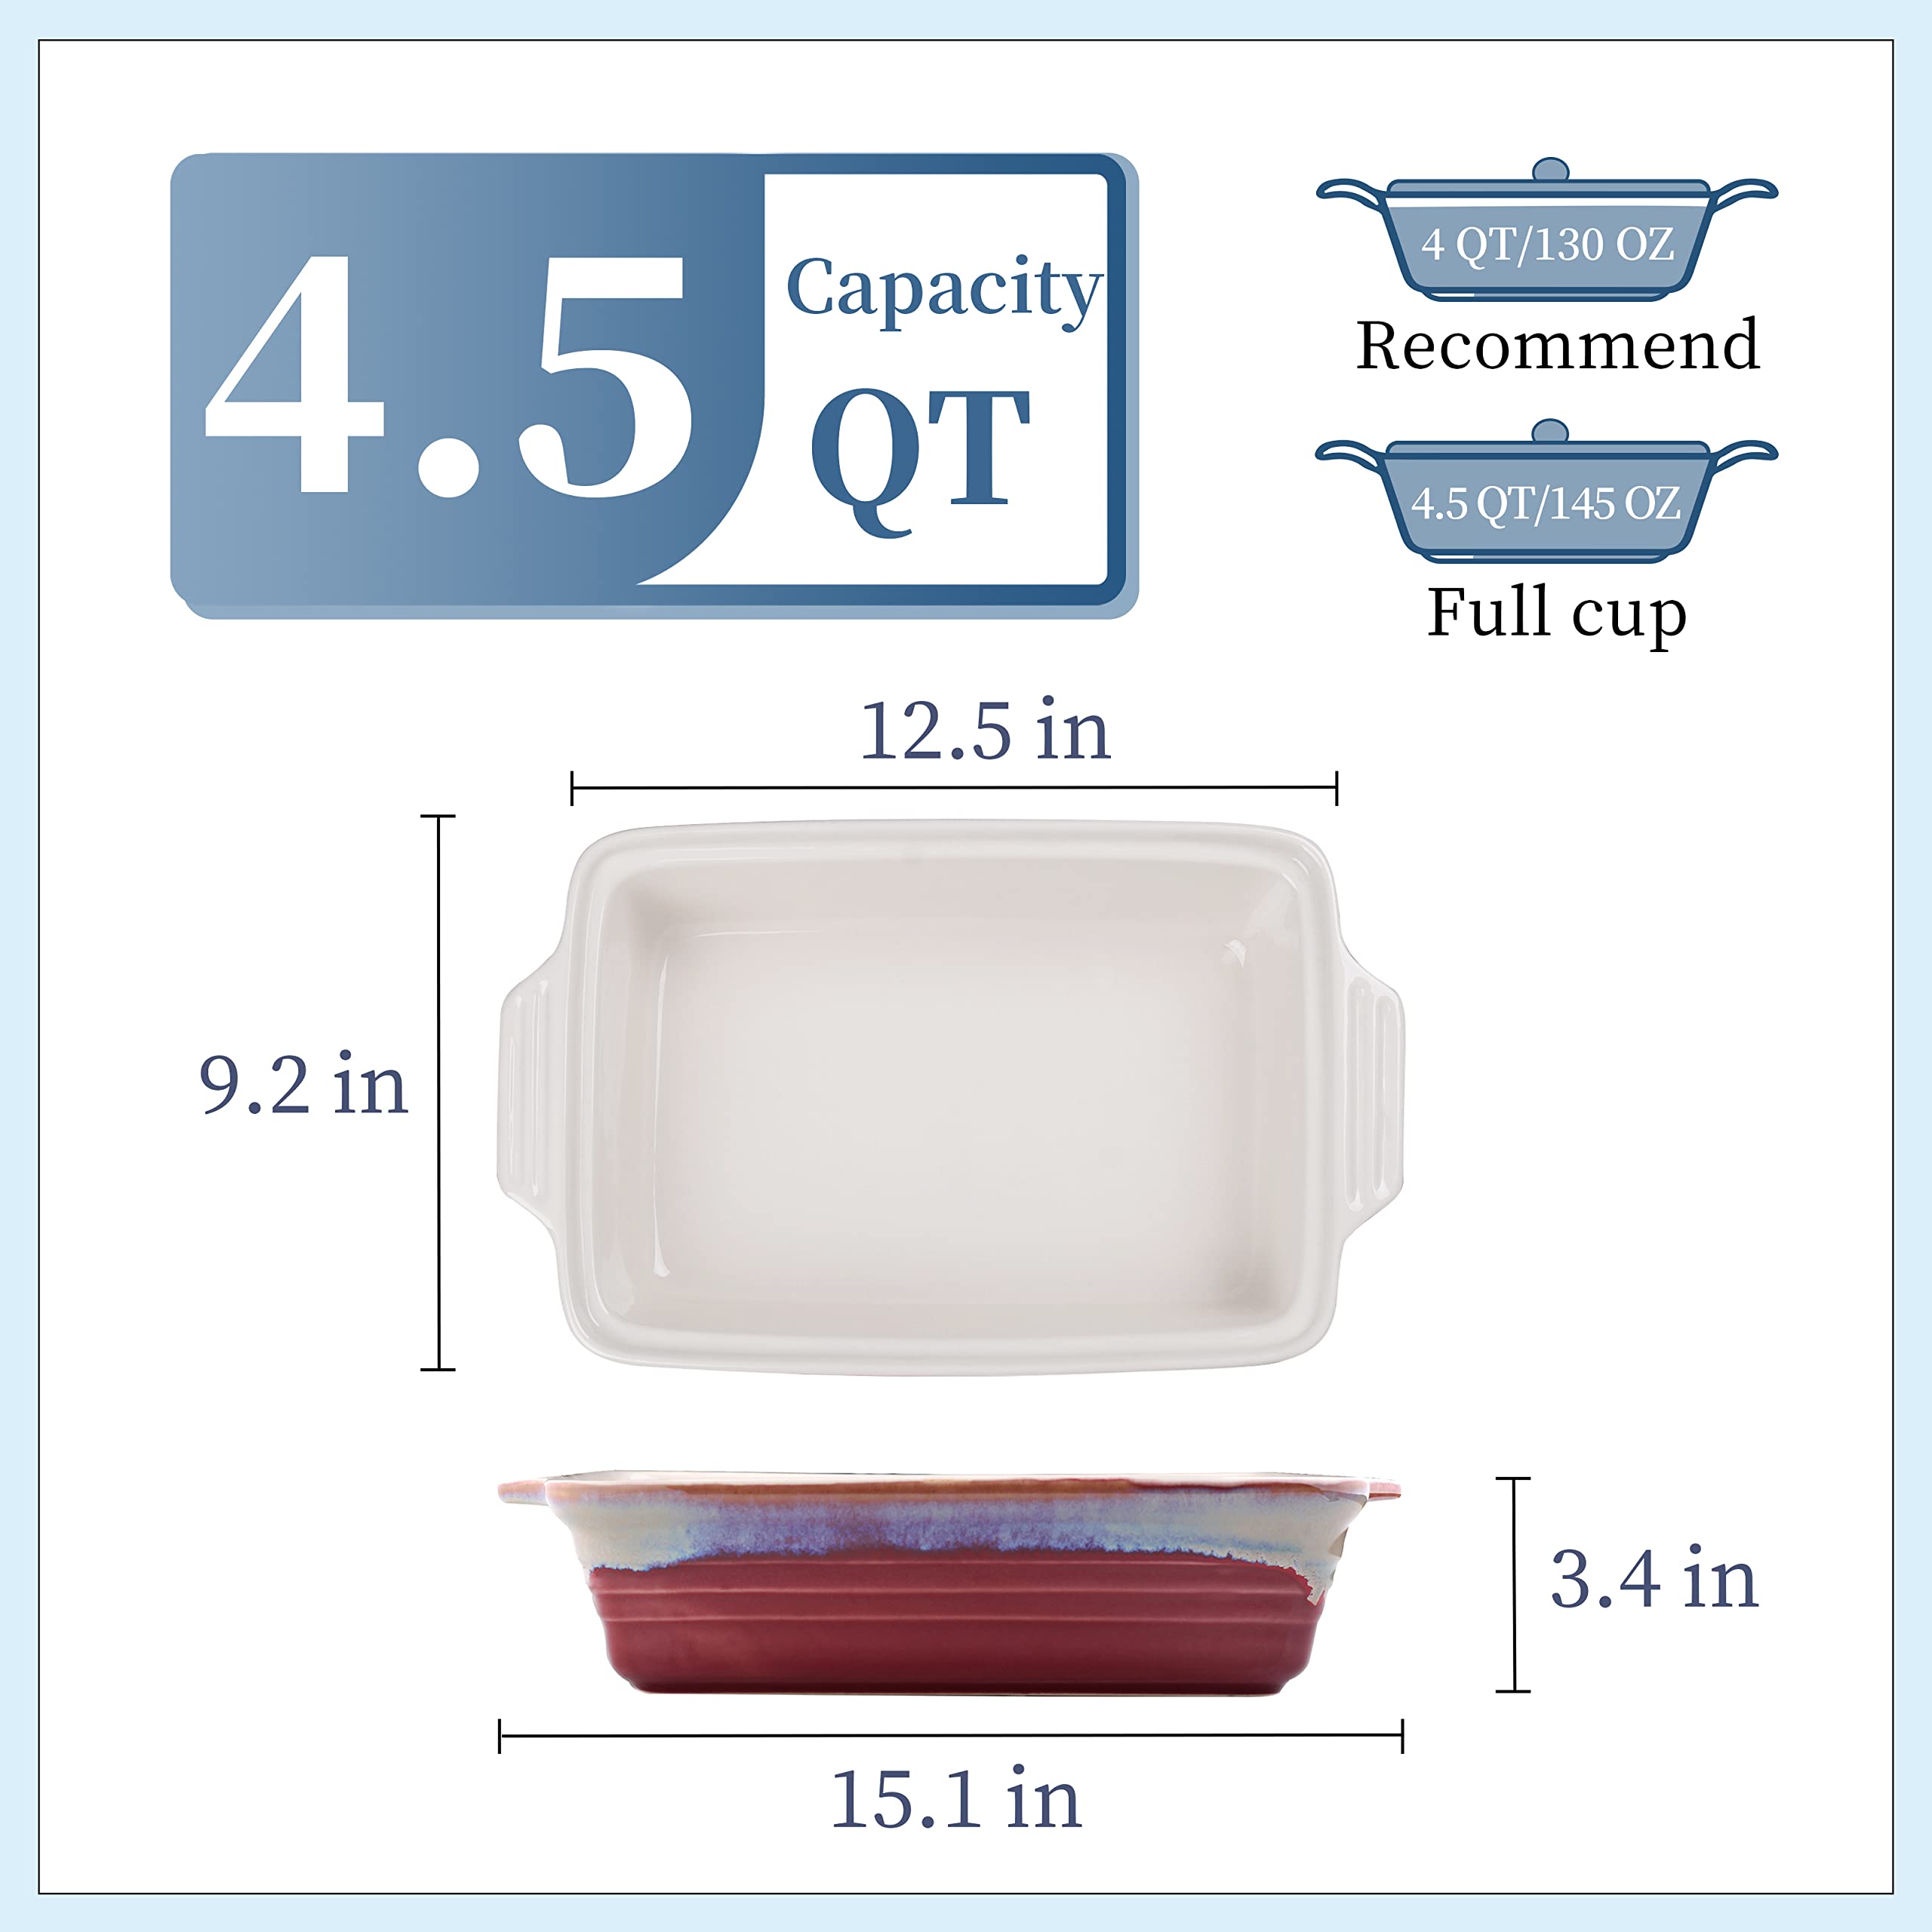 LOVECASA 4.5 Quart Deep Baking Dish with Lid, 9 x 13 Rectangular Ceramic Casserole Dish with Lid, Nonstick Baking Pans for Lasagna, Leftovers, Baking, Cooking Dishwasher Oven Safe, Red and Powder Gray